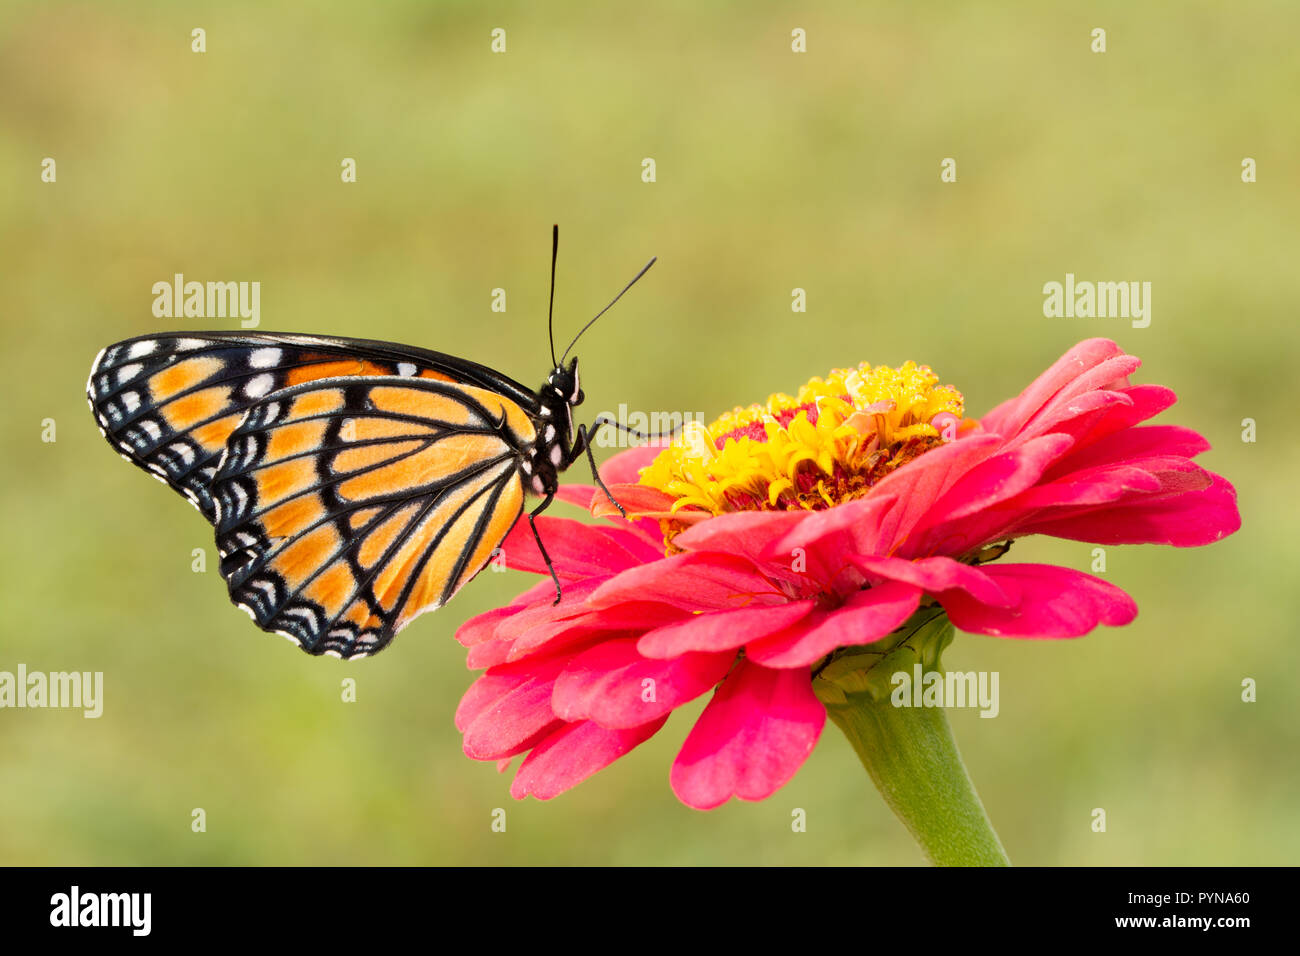 Ventral view of a stunningly beautiful Viceroy butterfly on a hot pink Zinnia flower, with green background Stock Photo